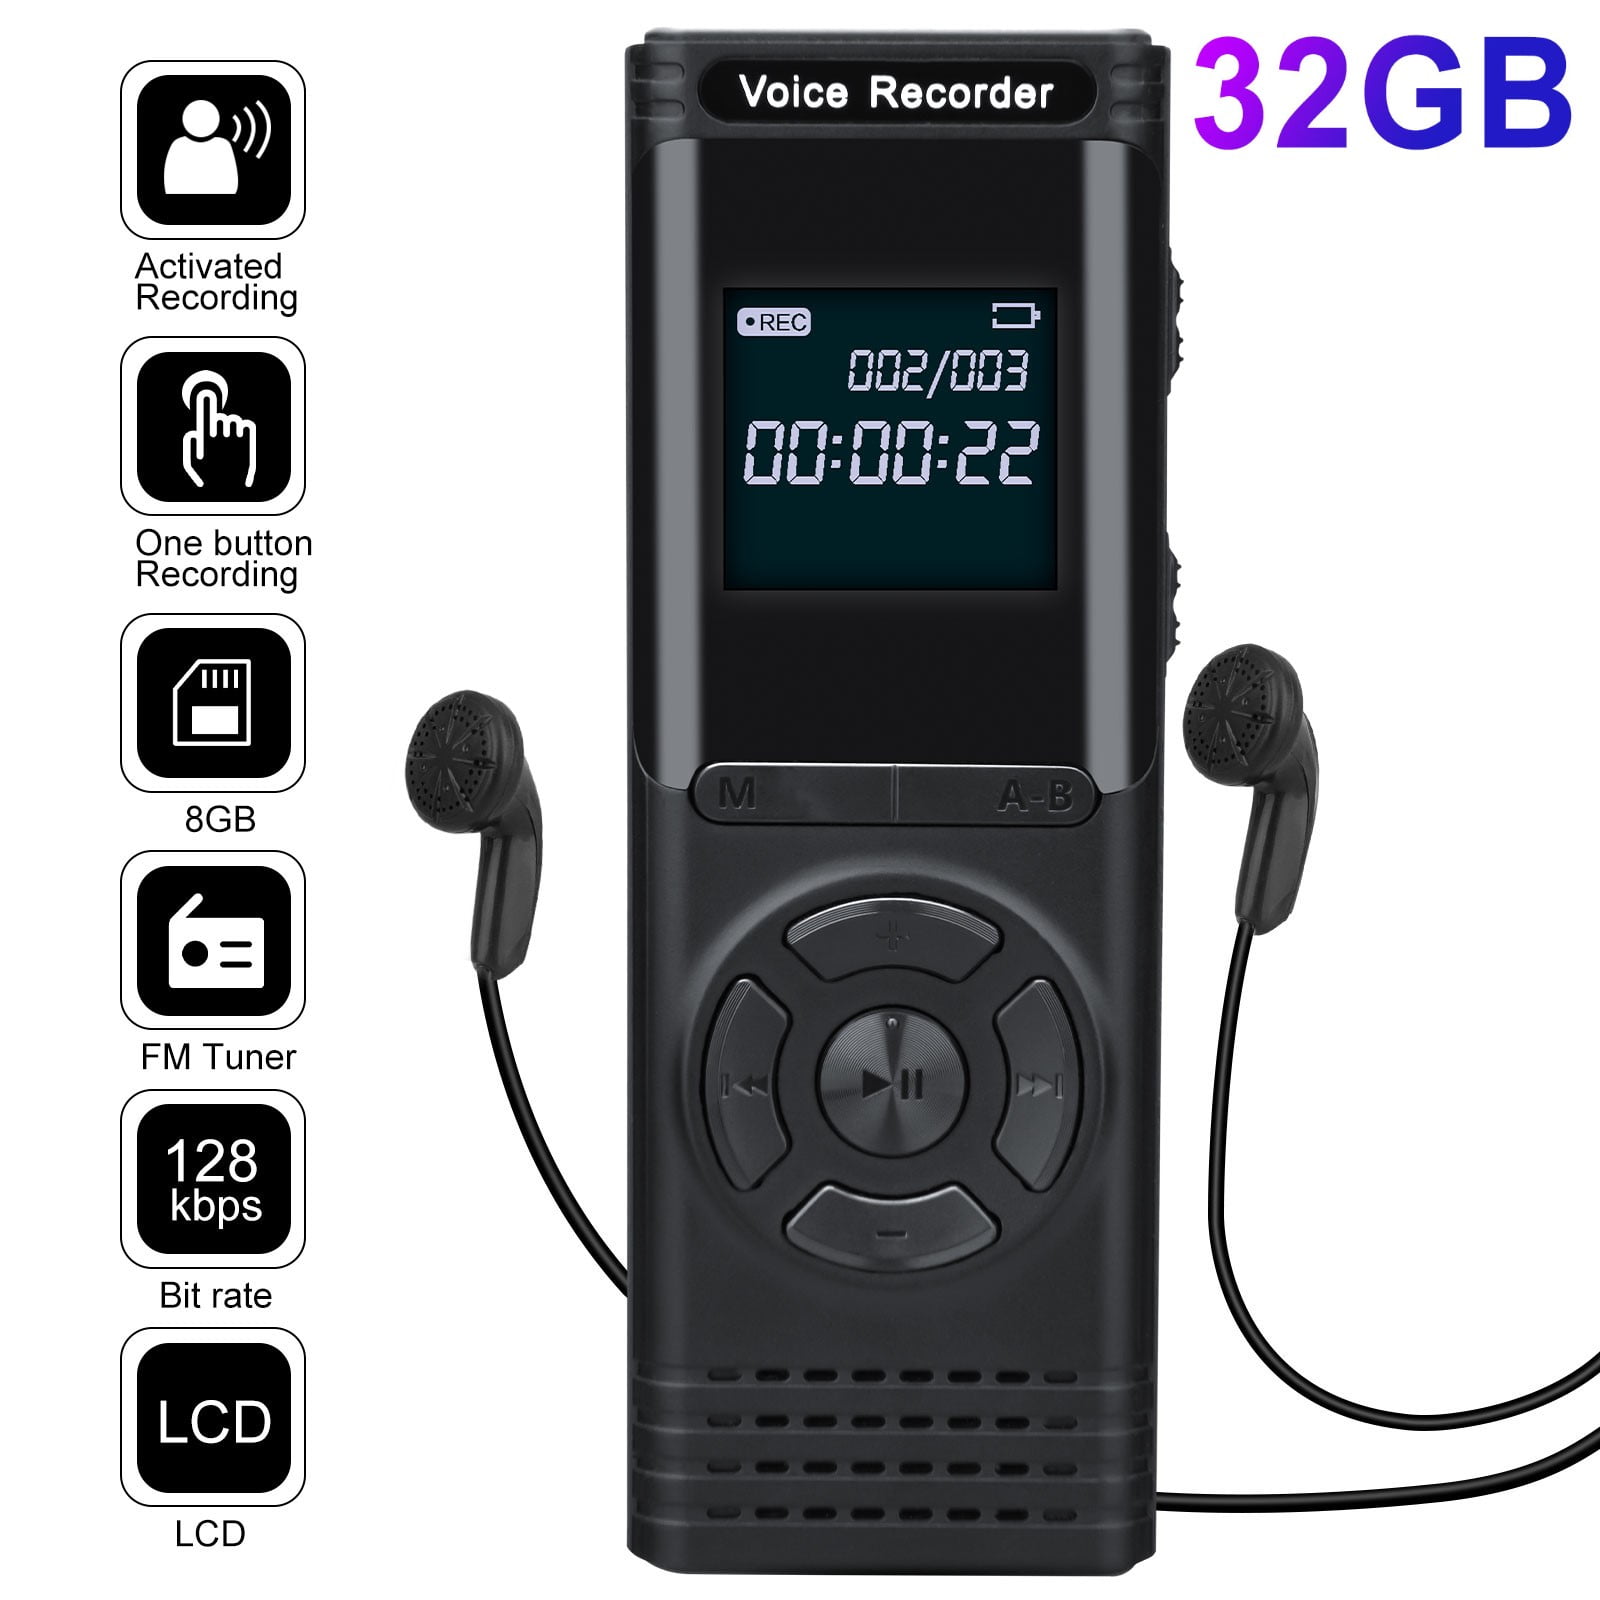 for Meetings College Interviews with MP3/USB/Wiriting/Metal Body QZTELECTRONIC Digital Voice Activated Recorder for Lectures Voice Recorder 16GB-Black